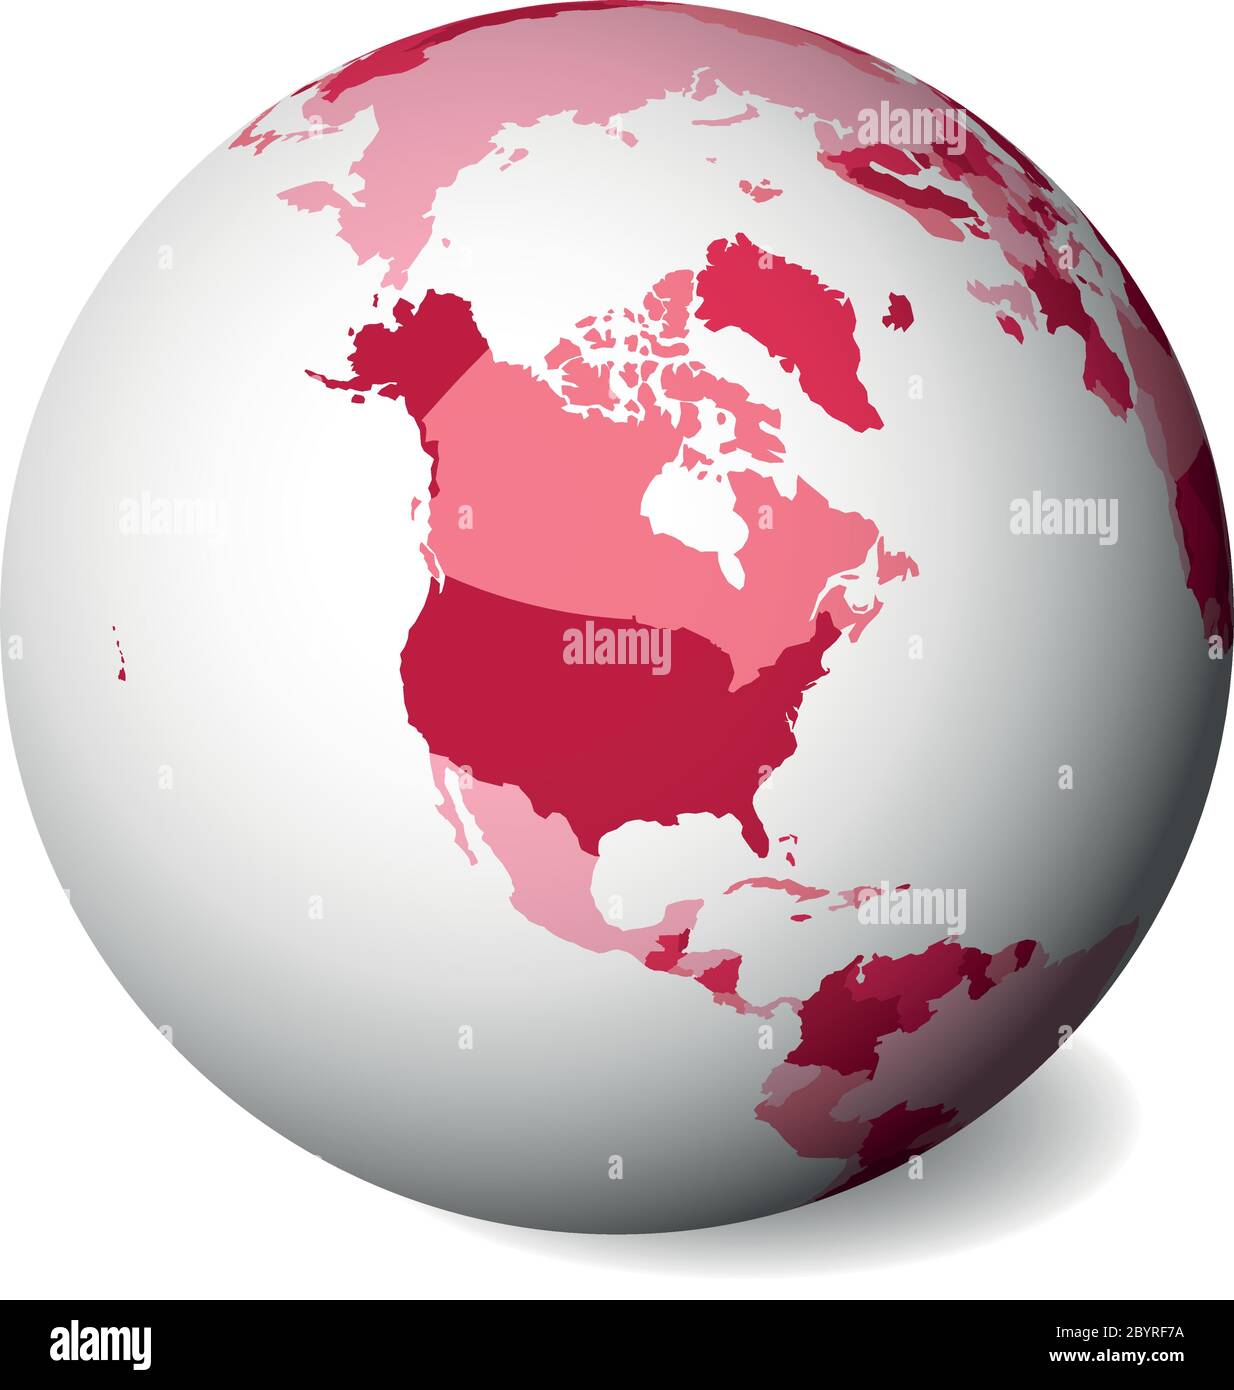 Blank political map of North America. 3D Earth globe with pink map. Vector illustration. Stock Vector